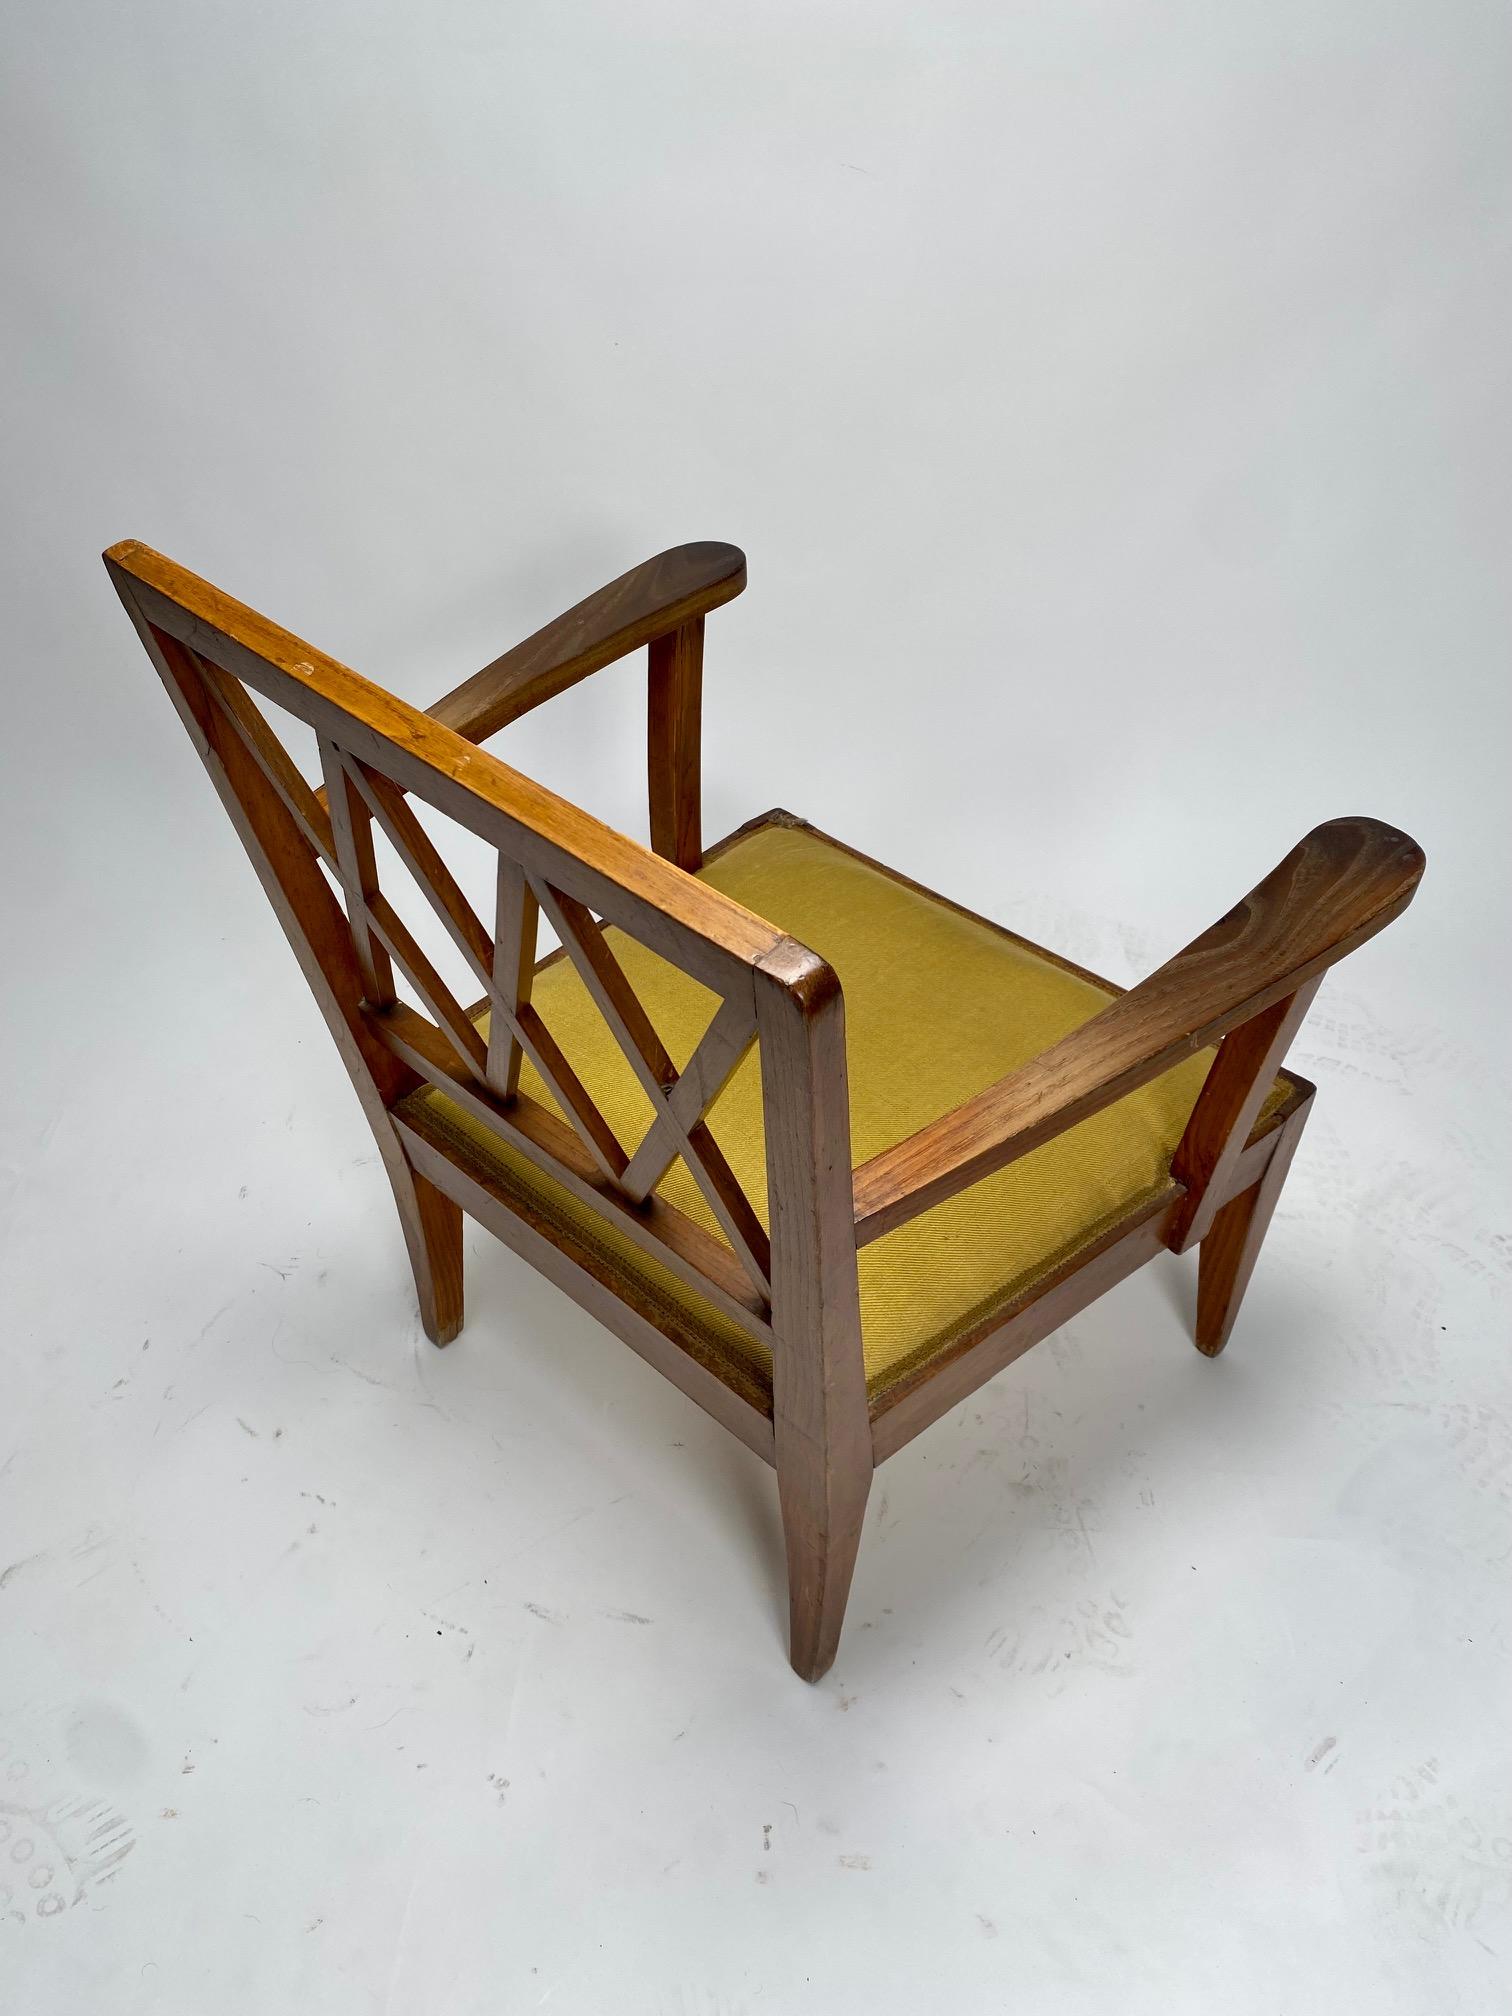 Fabric Sculptural wooden Armchair, Gio Ponti Style, Italy, 1930s For Sale